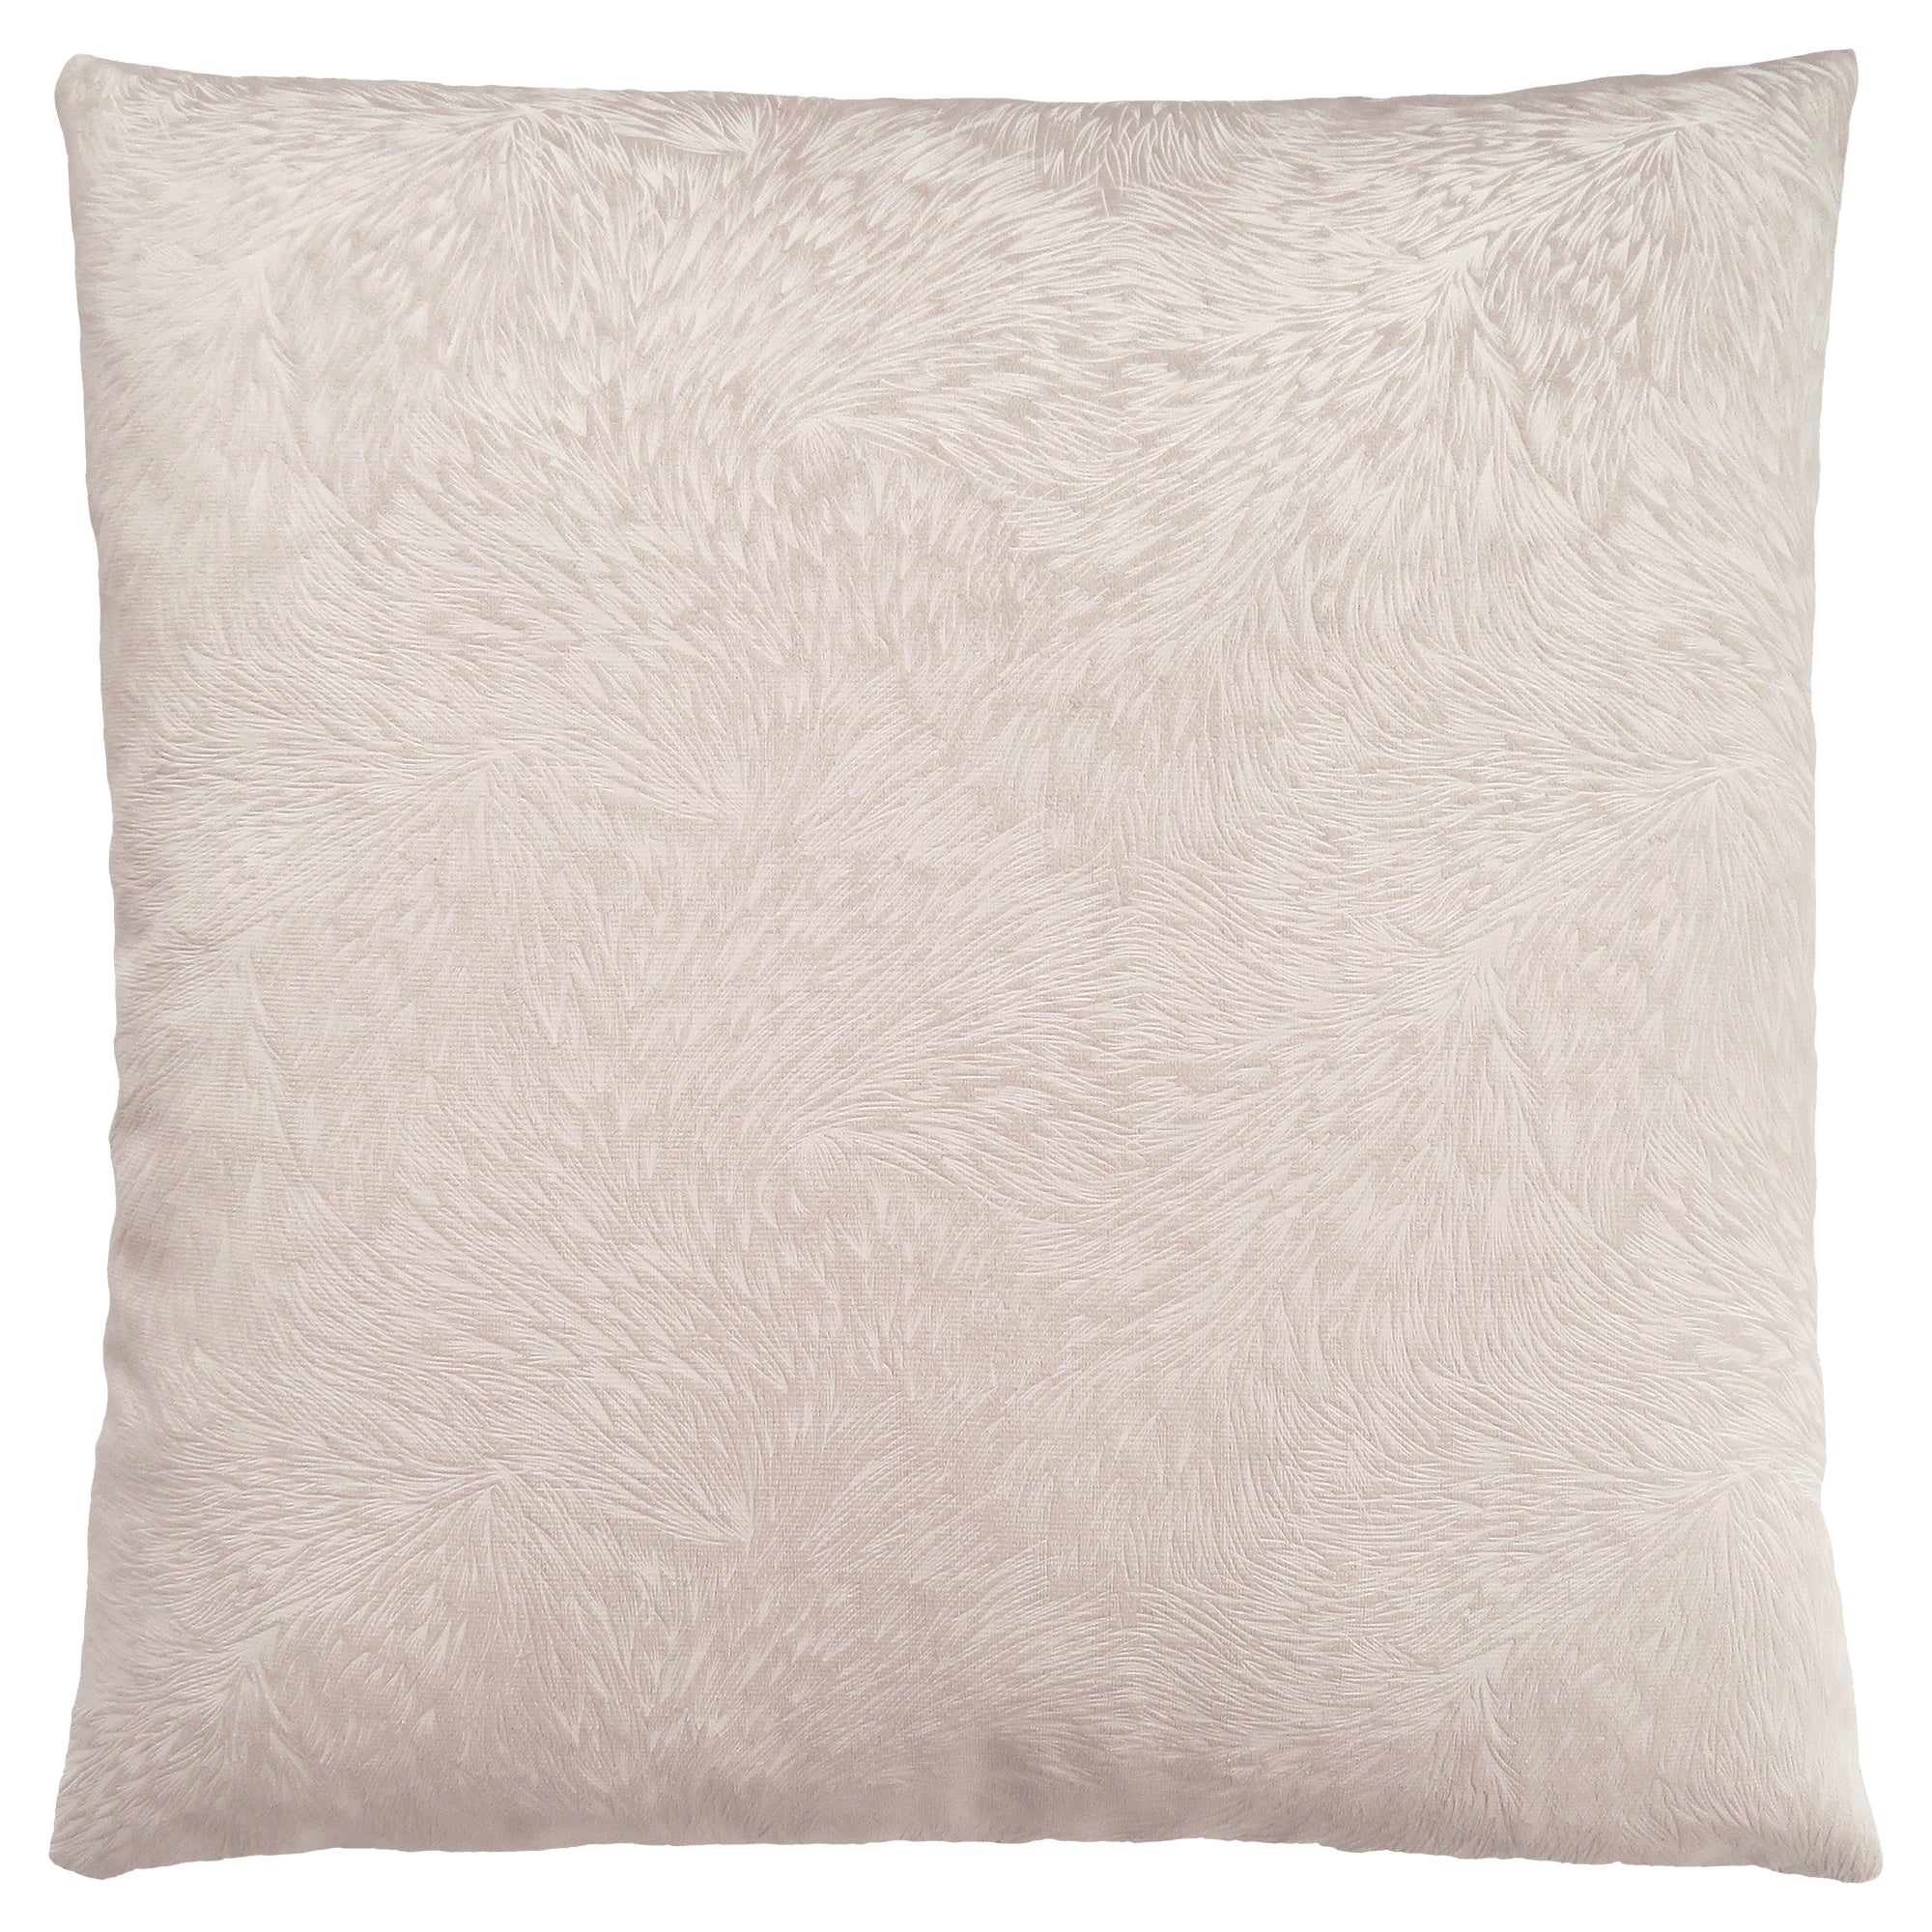 MN-979318    Pillows, 18 X 18 Square, Insert Included, Decorative Throw, Accent, Sofa, Couch, Bed, Lush Velvet-Look Polyester Fabric, Hypoallergenic Soft Polyester Insert, Light Taupe, Glam